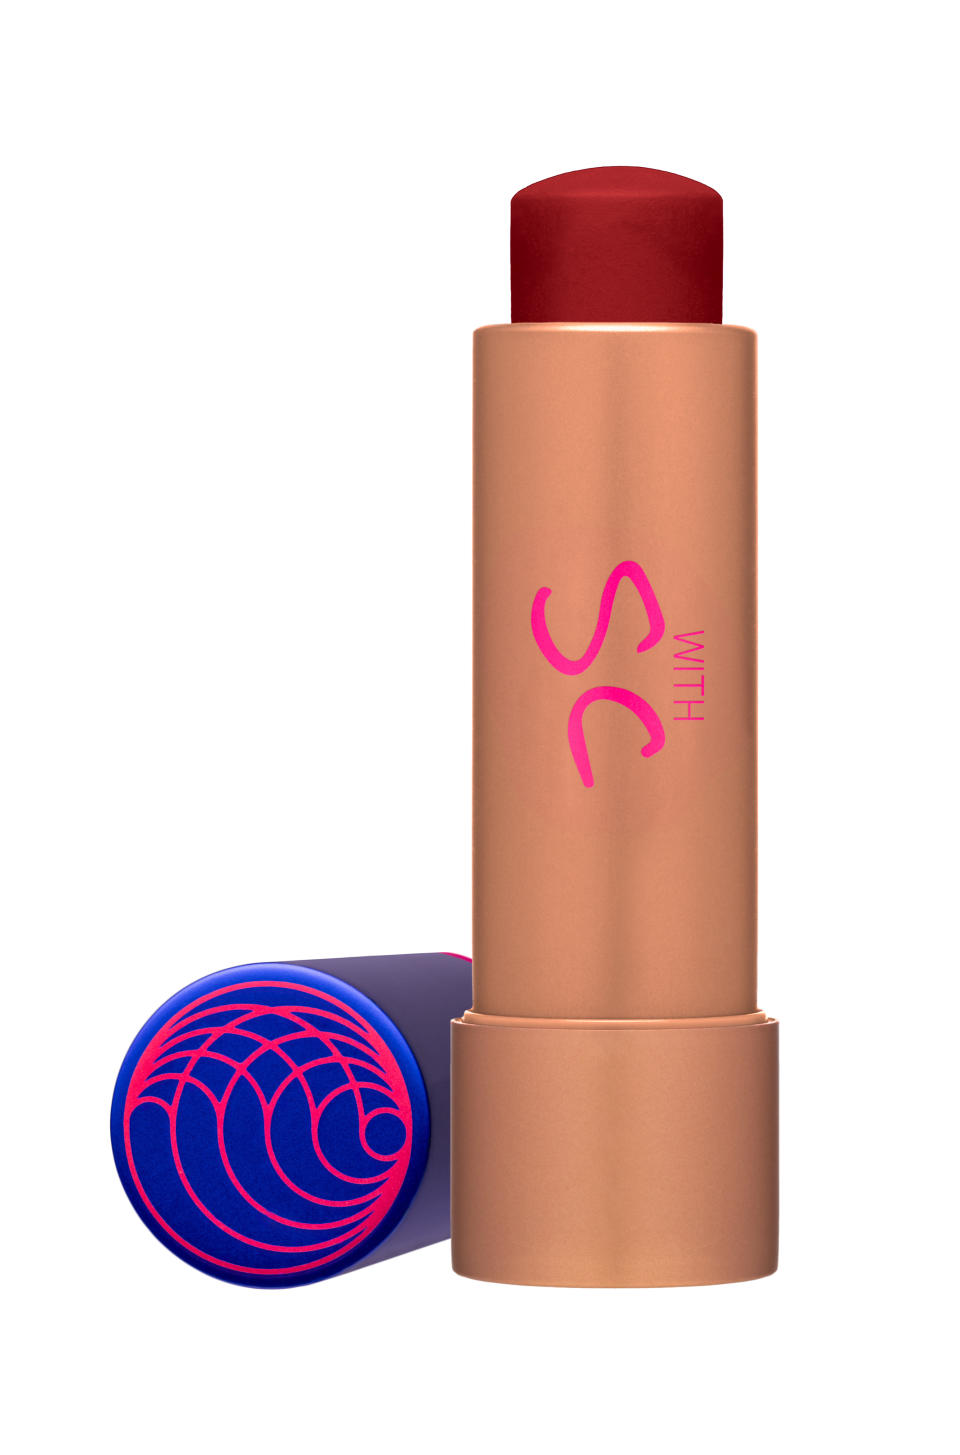 The Tinted Balm in Shade 3.